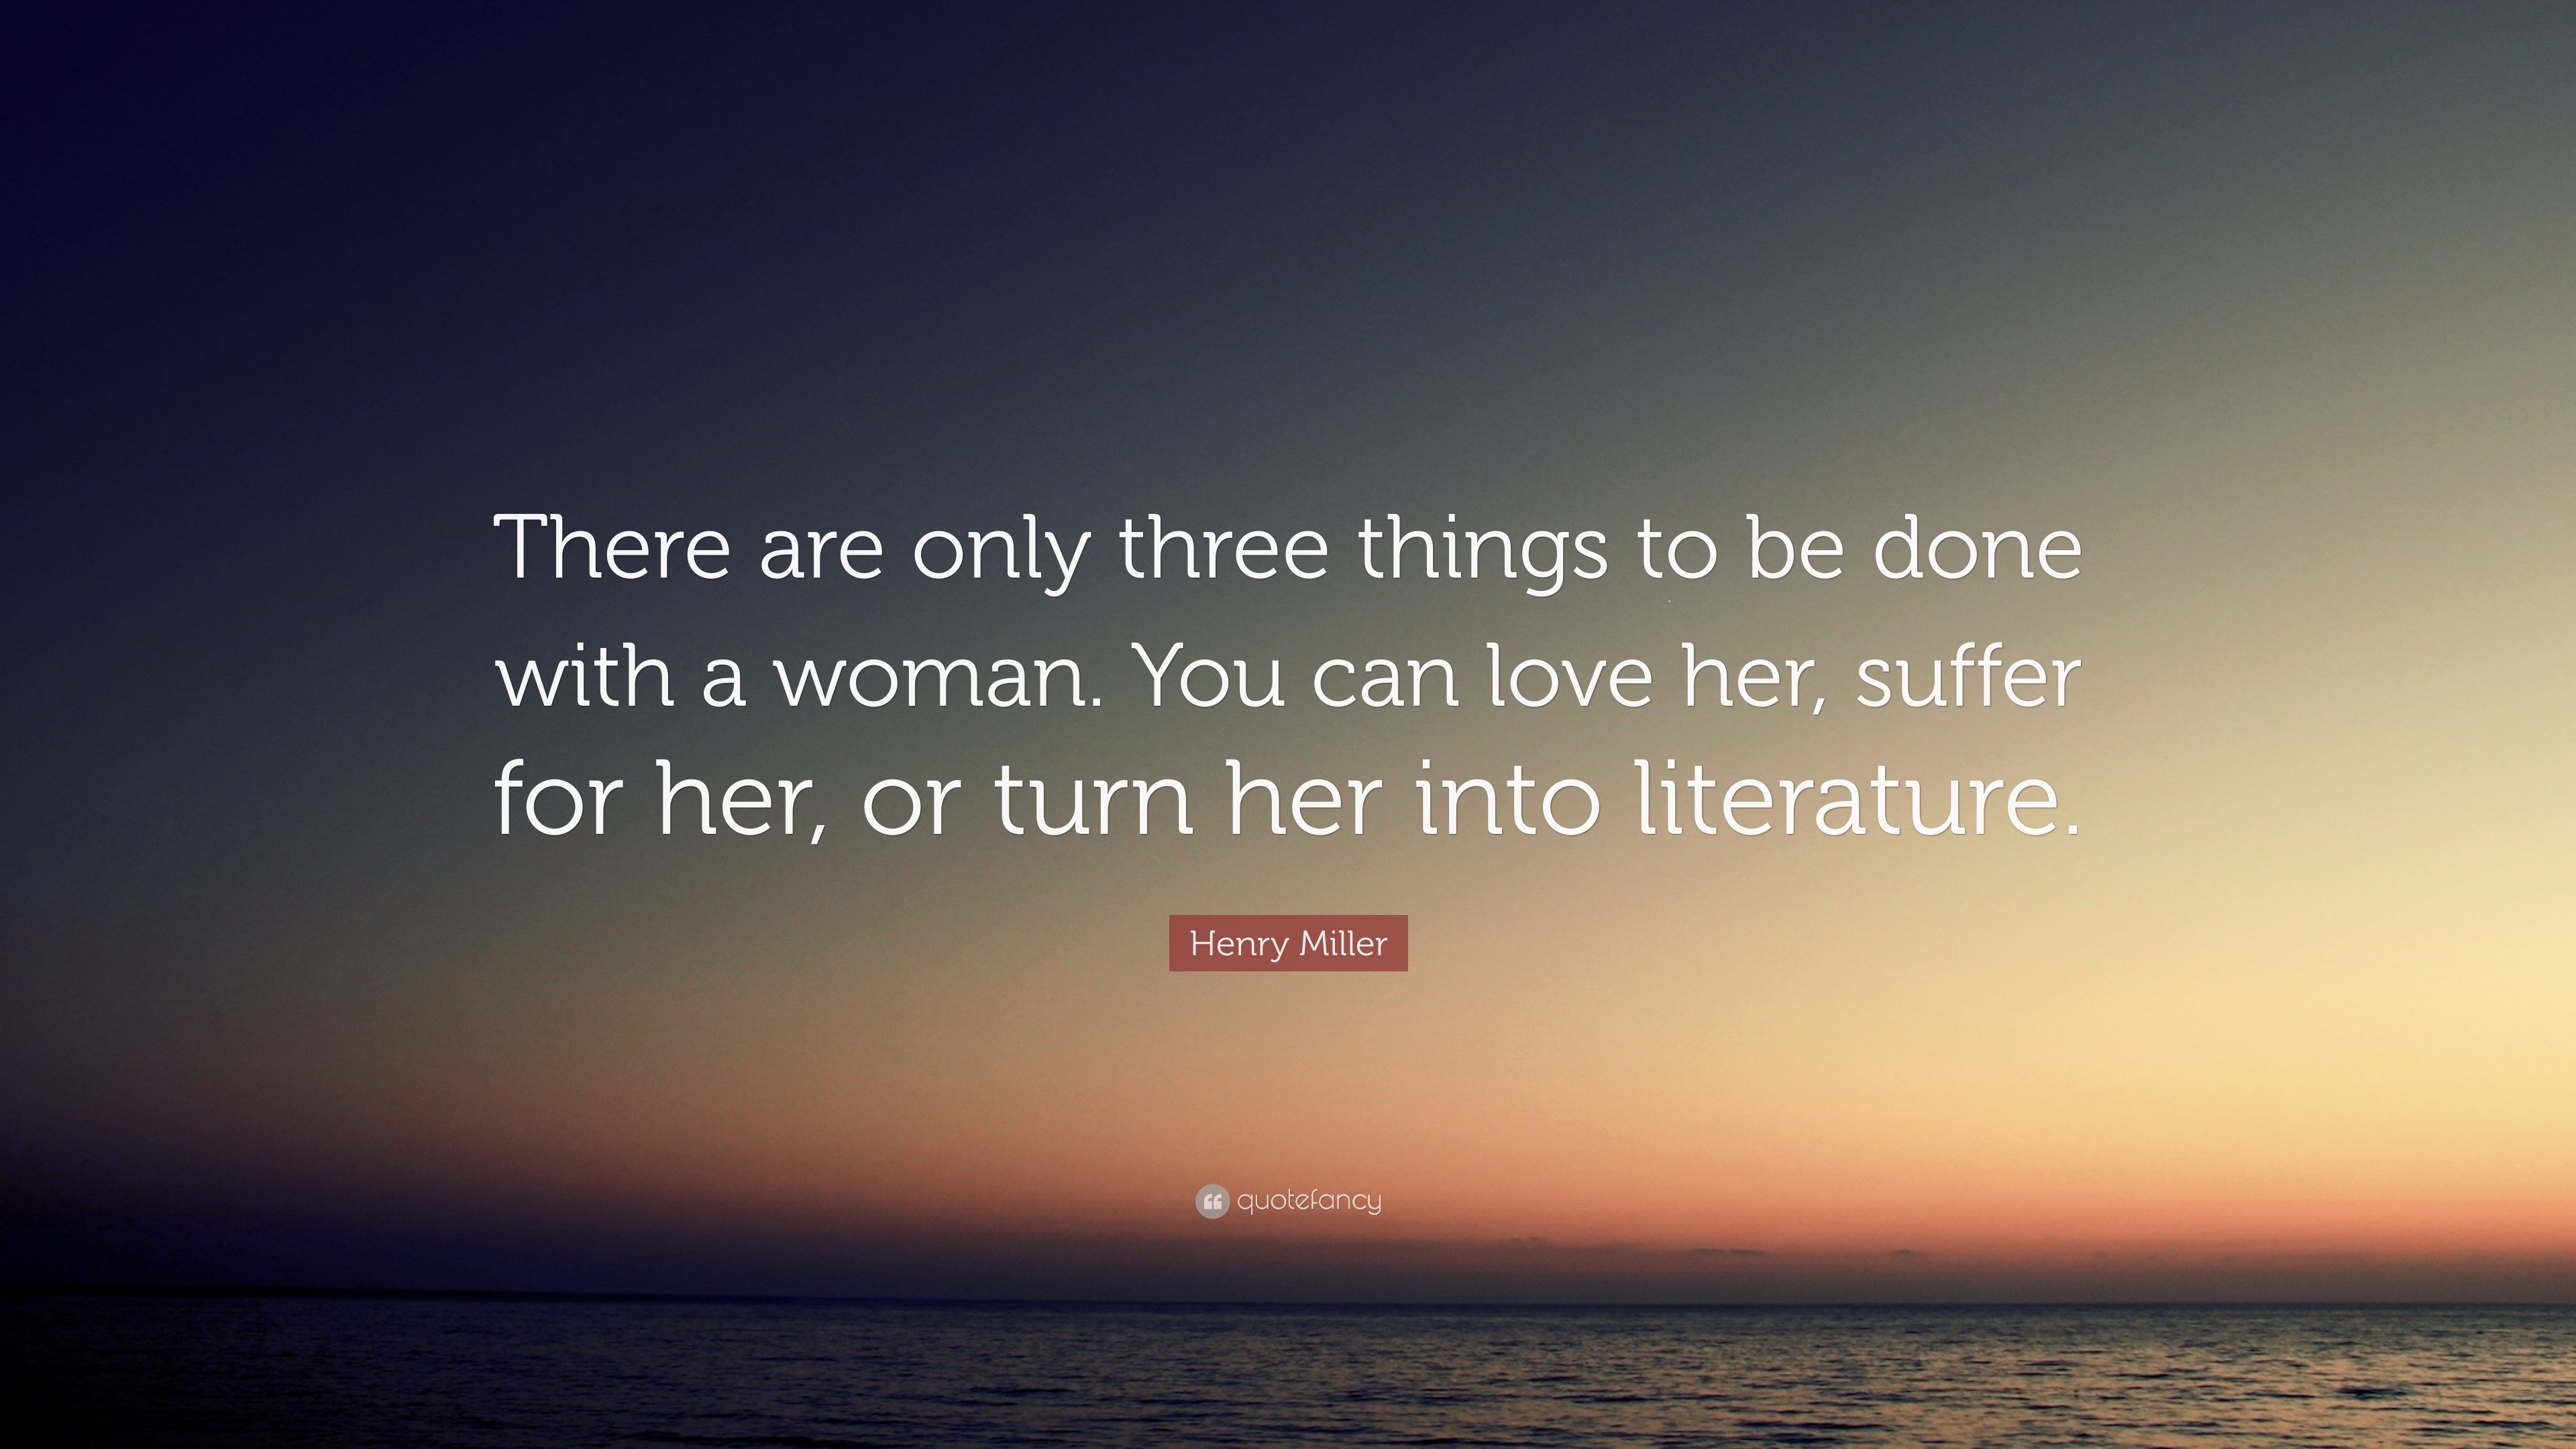 Henry Miller Quote: “There are only three things to be done with a ...